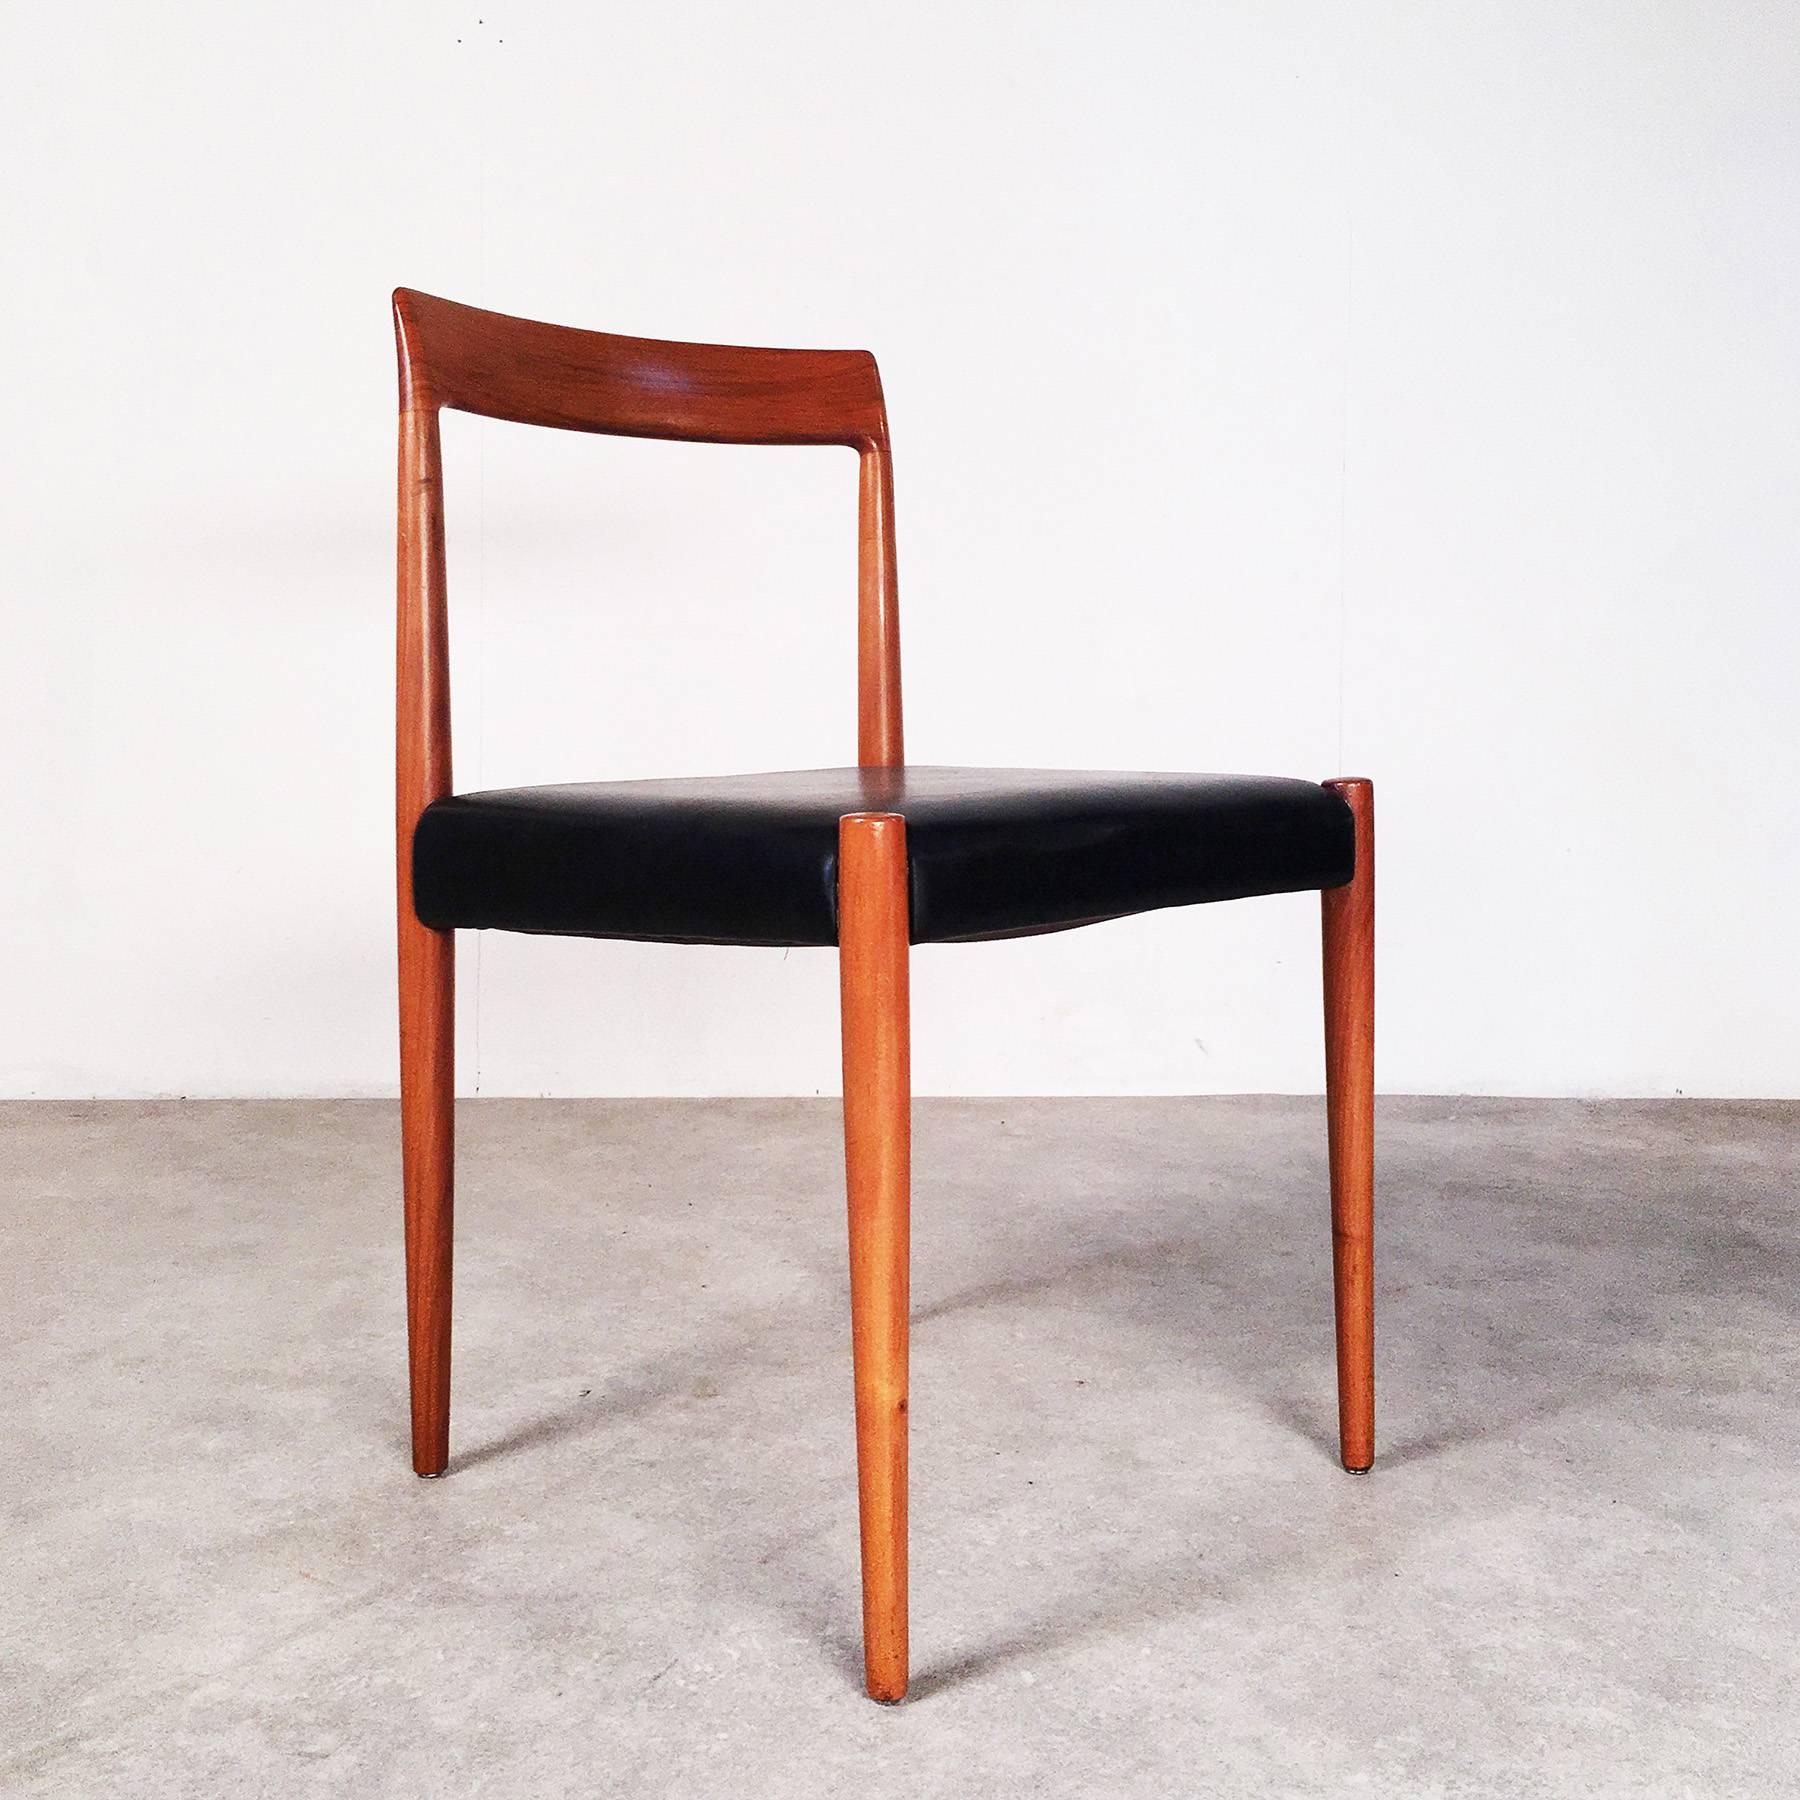 Six dining chairs, manufactured in the 1950s in Germany by Lübke. The model stands out for its minimalistic design and high quality craftsmanship, which is typical for Lübke products from that period.
The chairs re made of massive walnut wood. The